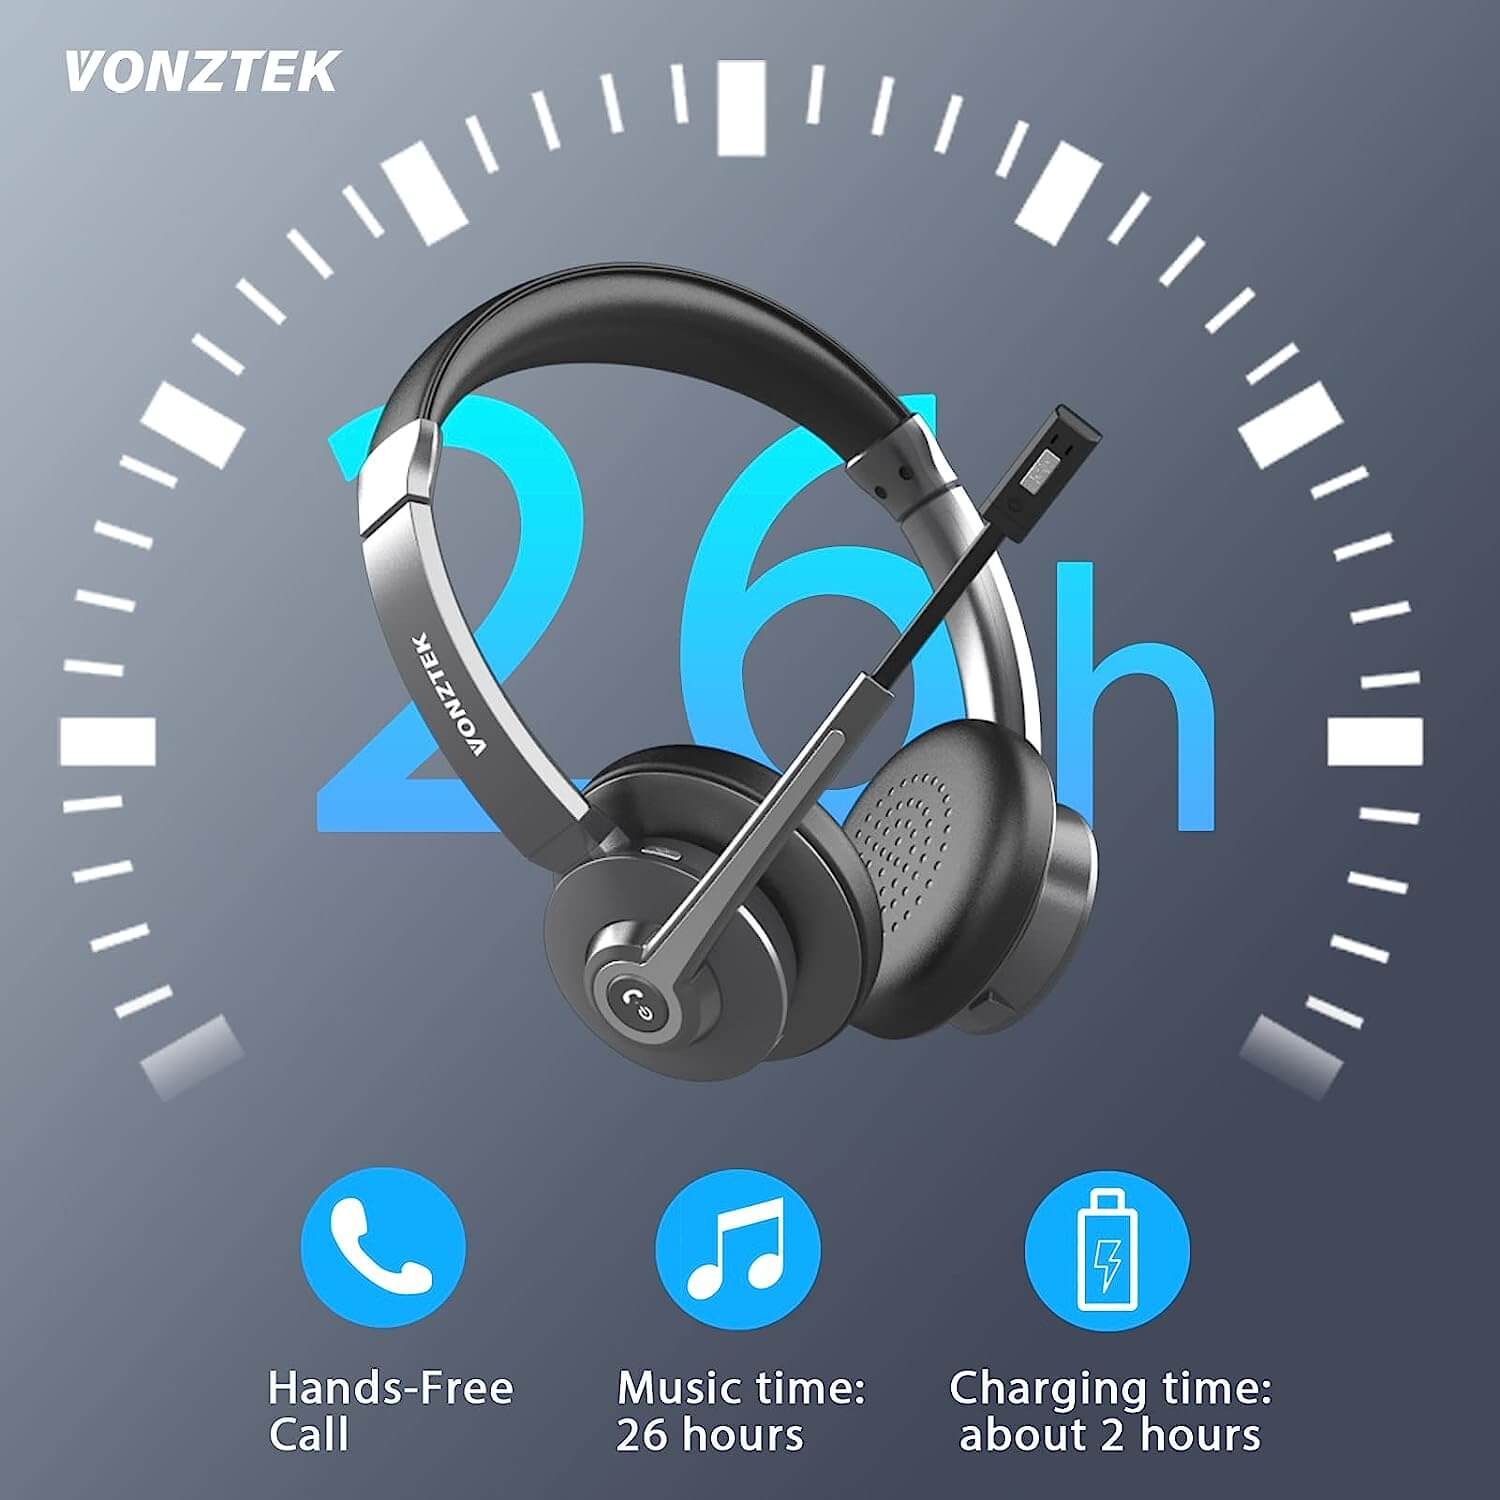 Hands-free call,Music time 26 hours,Charging time about 2 hours.